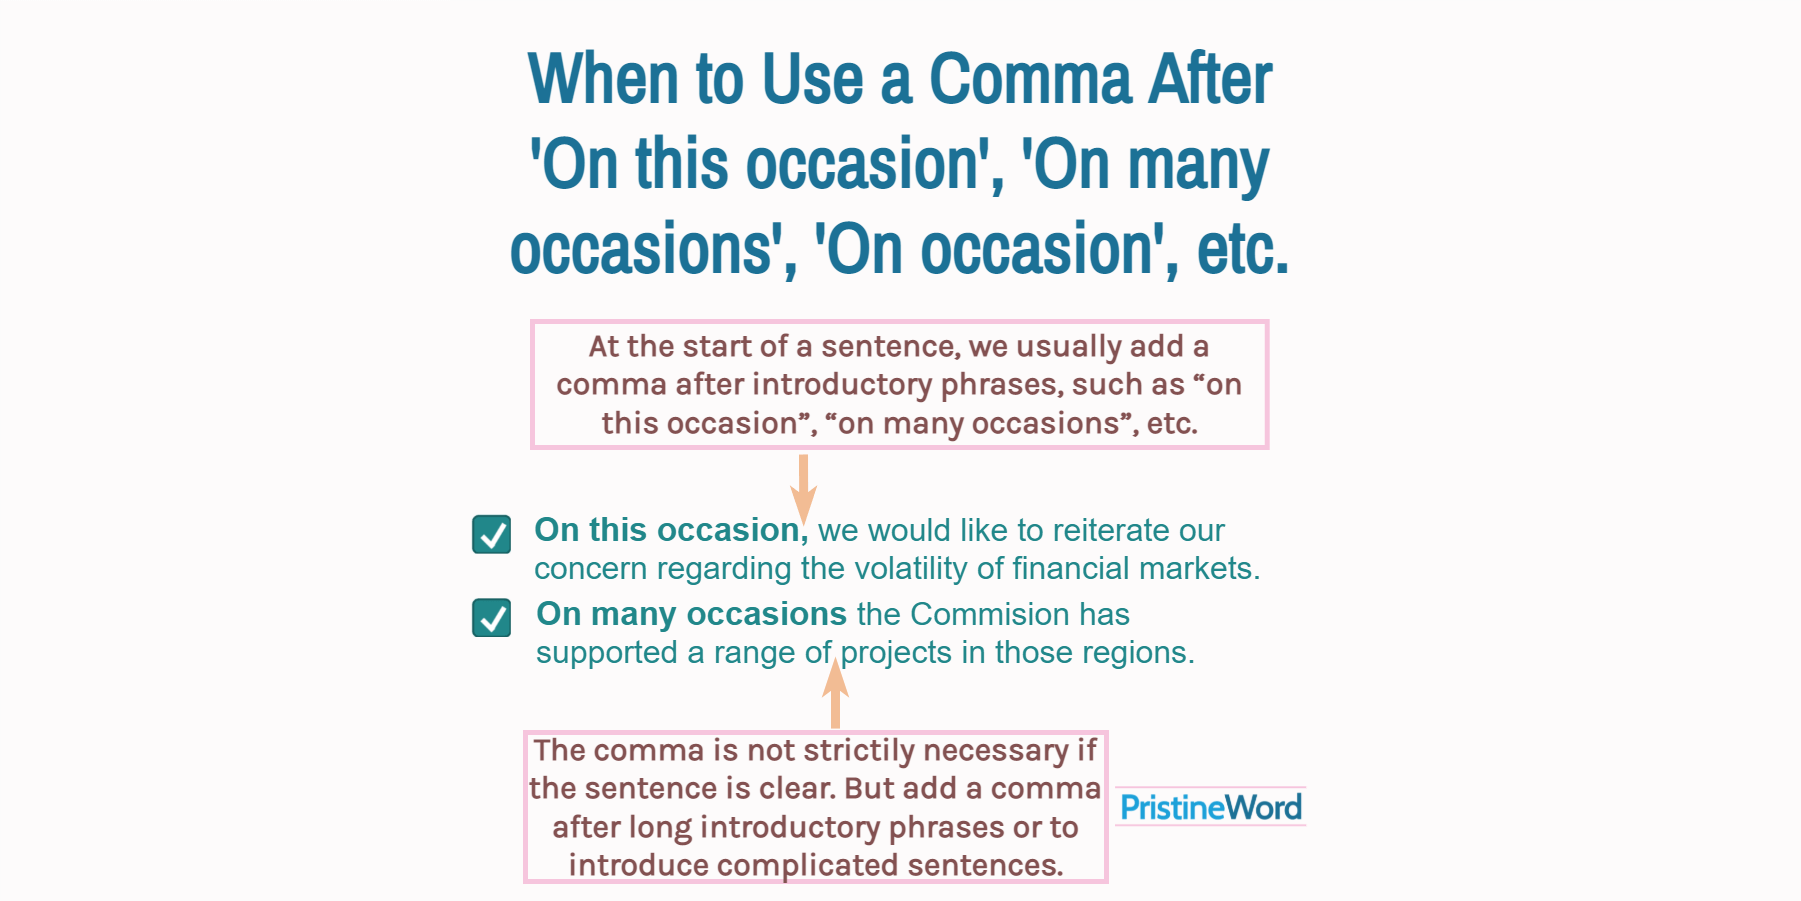 When to Use a Comma After 'On this occasion', 'On many occasions', etc.